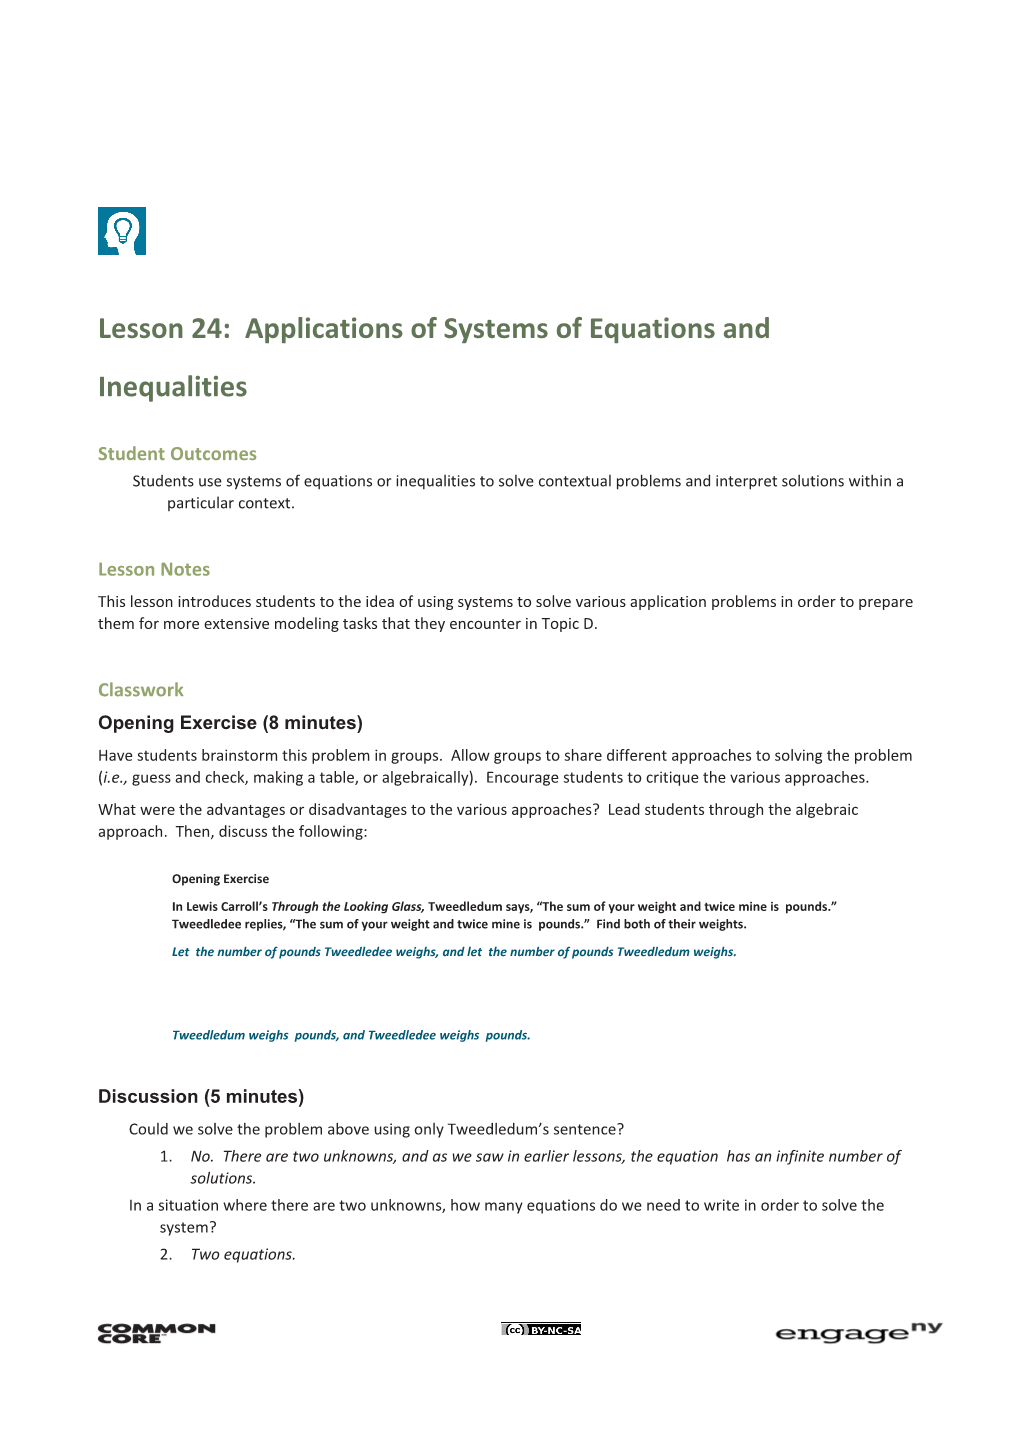 Lesson 24: Applications of Systems of Equations and Inequalities